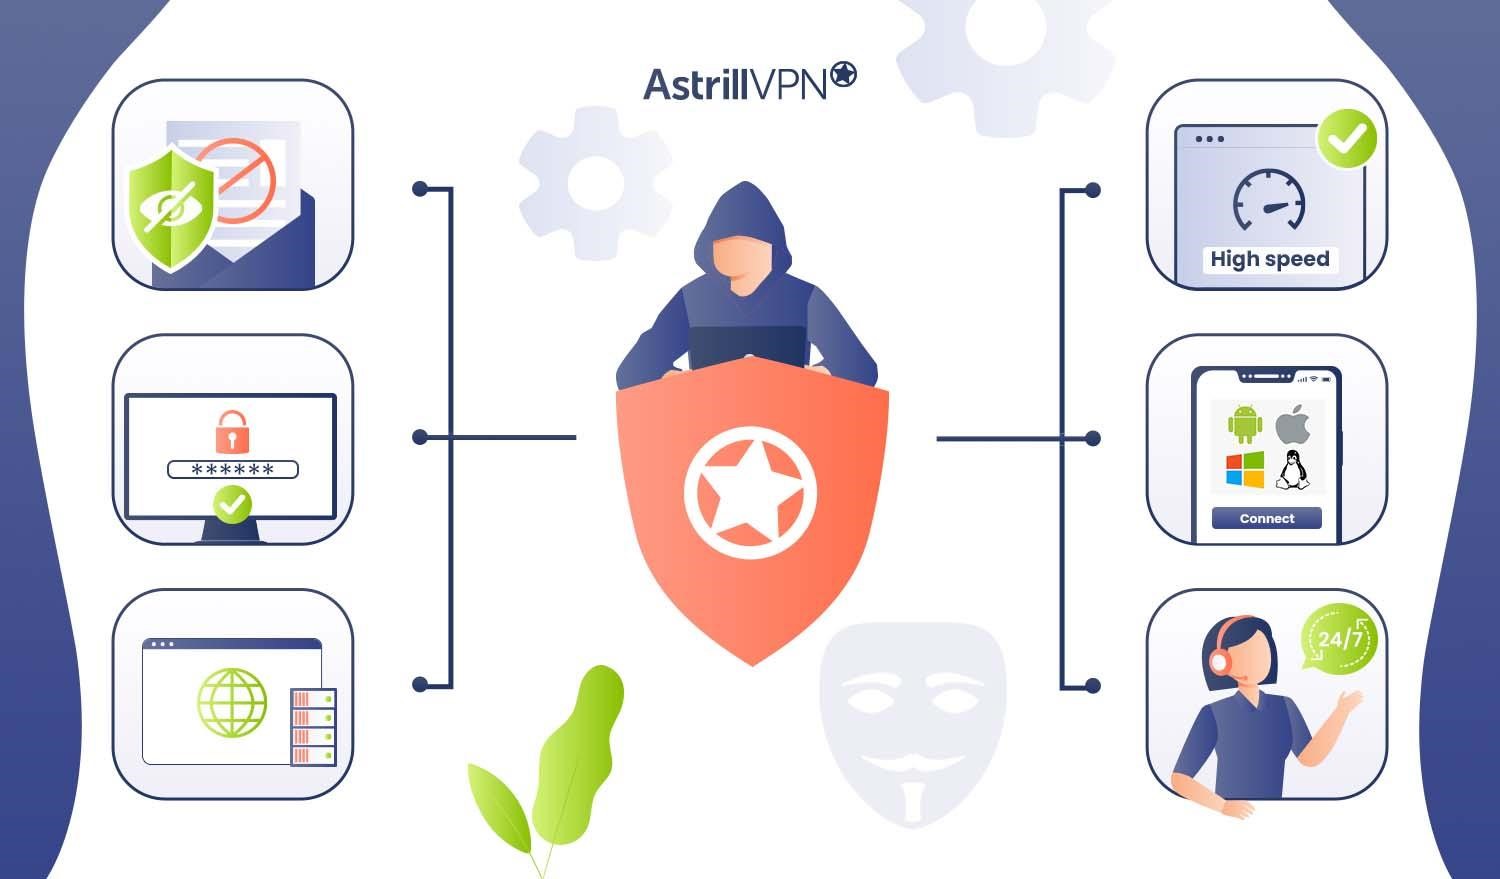 Why is AstrillVPN best for remaining anonymous online